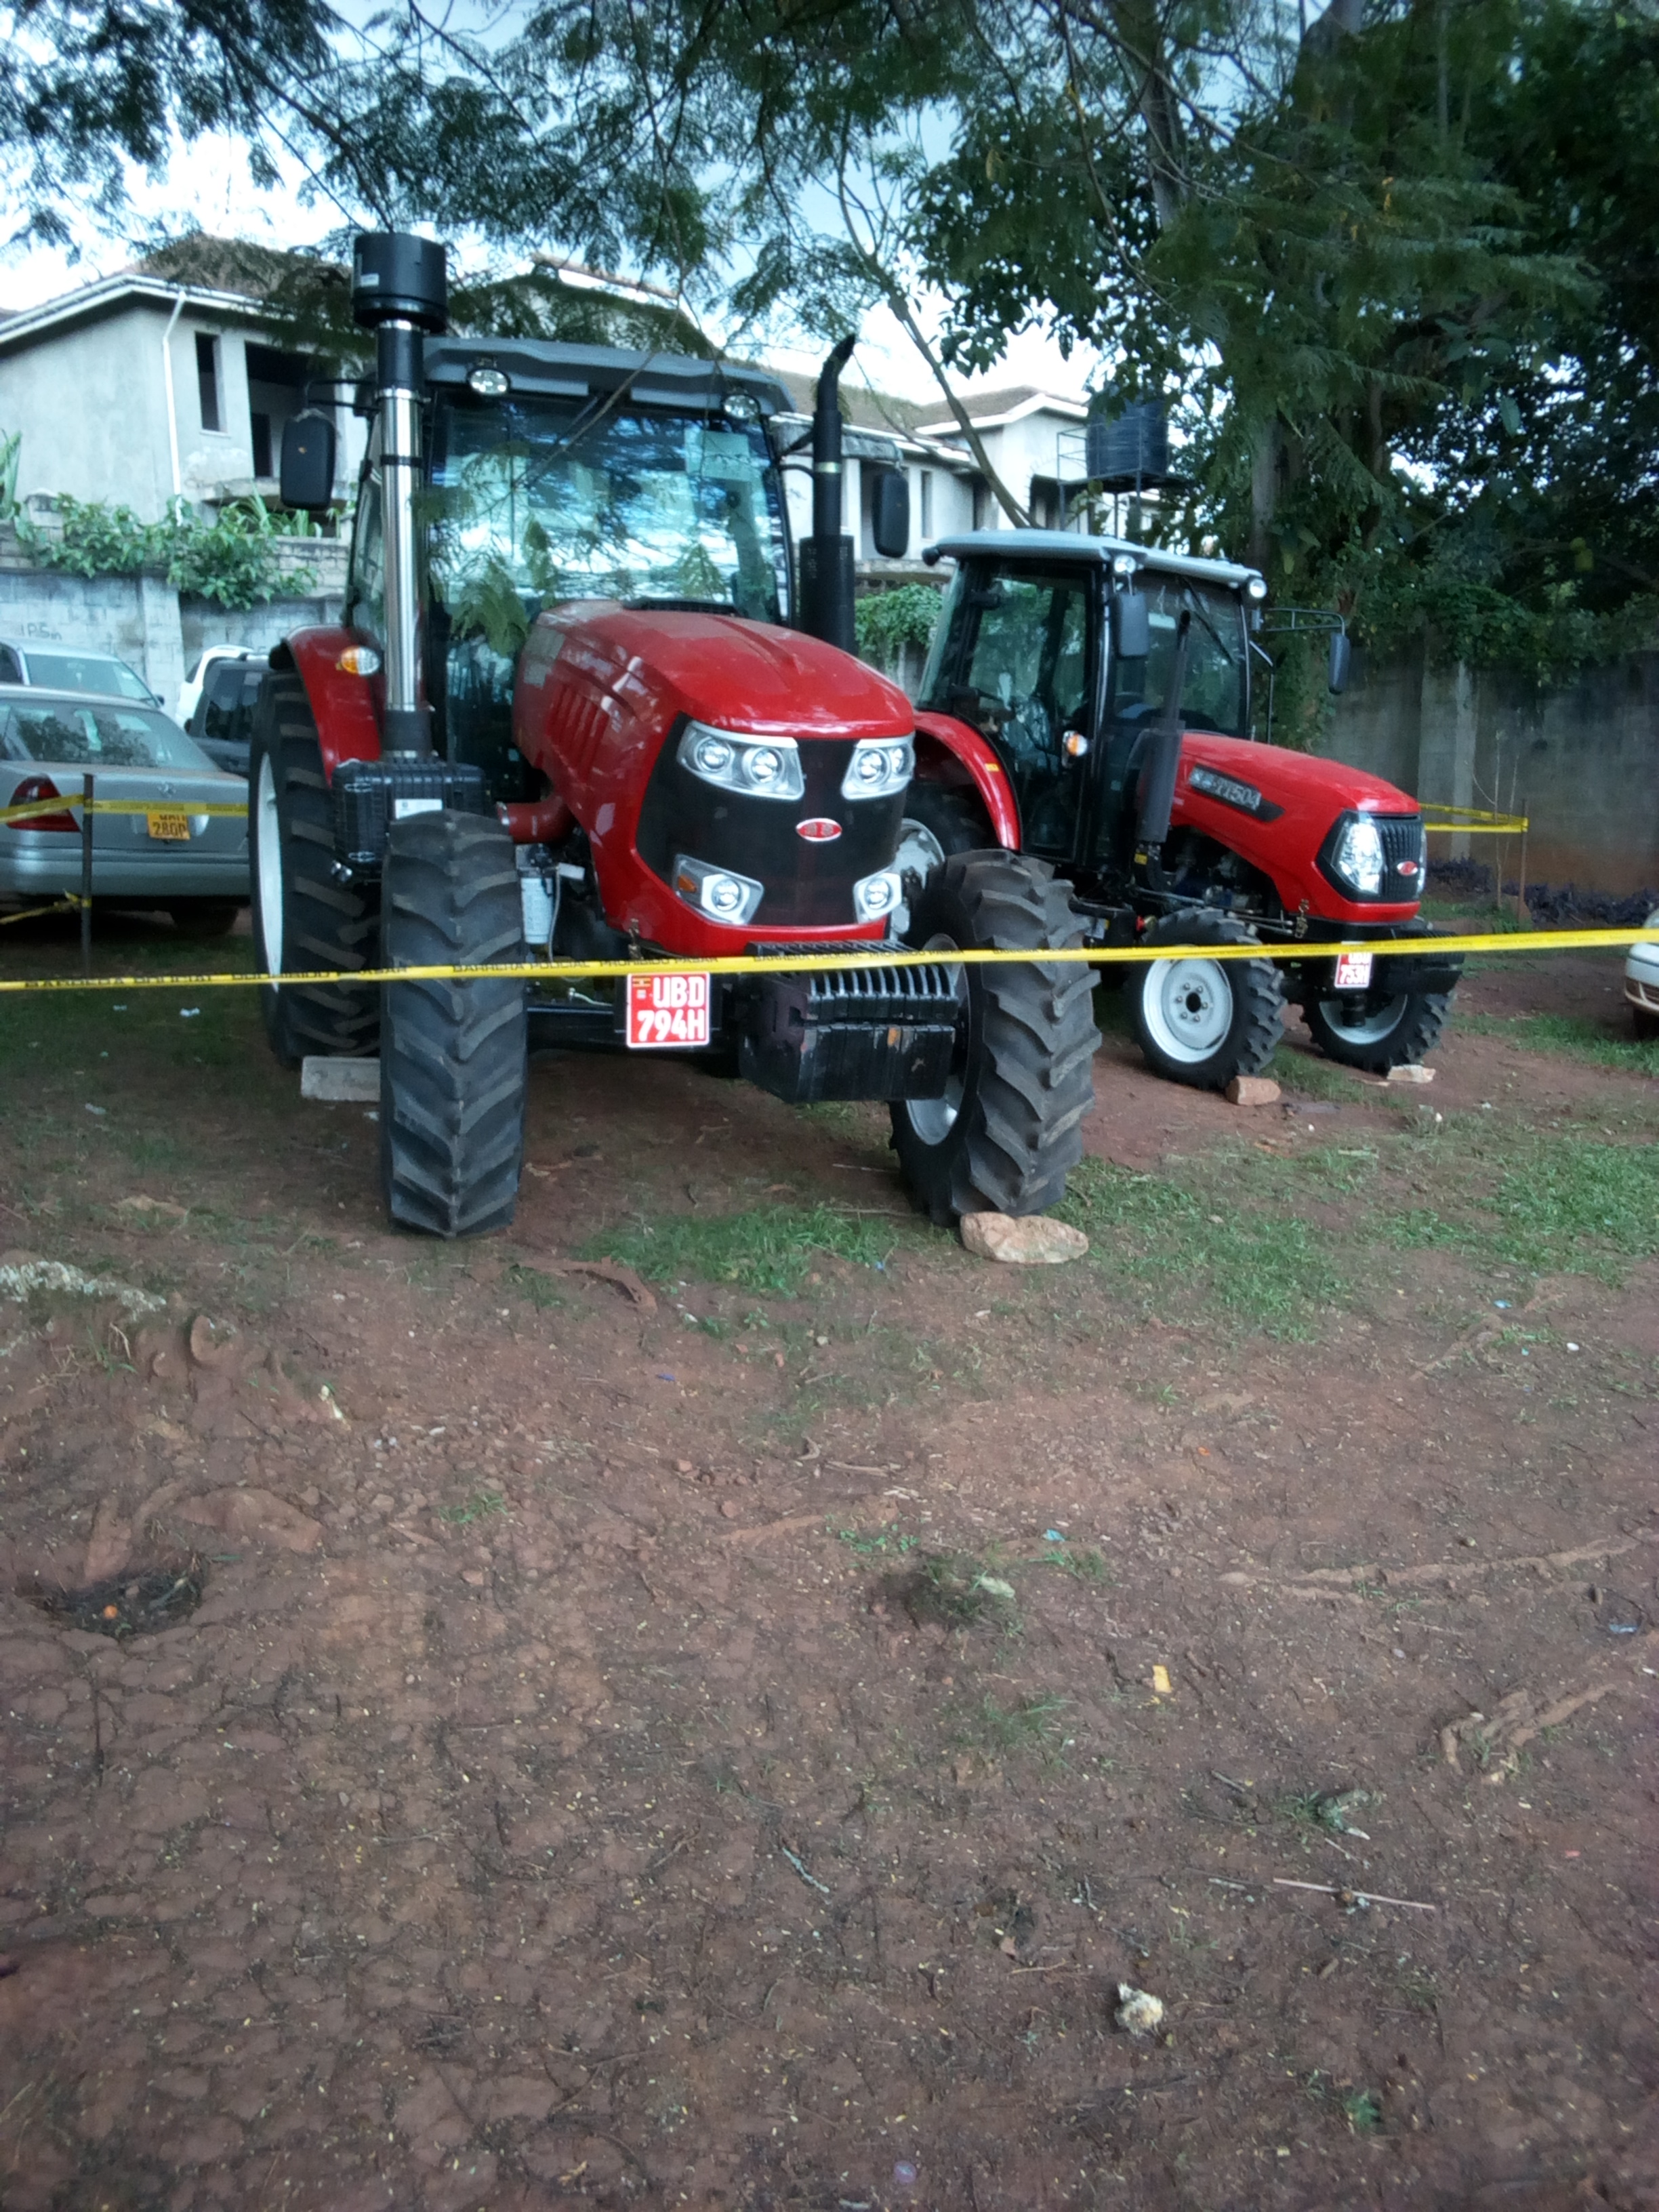 KAKI in theft of tractors and tax evasion